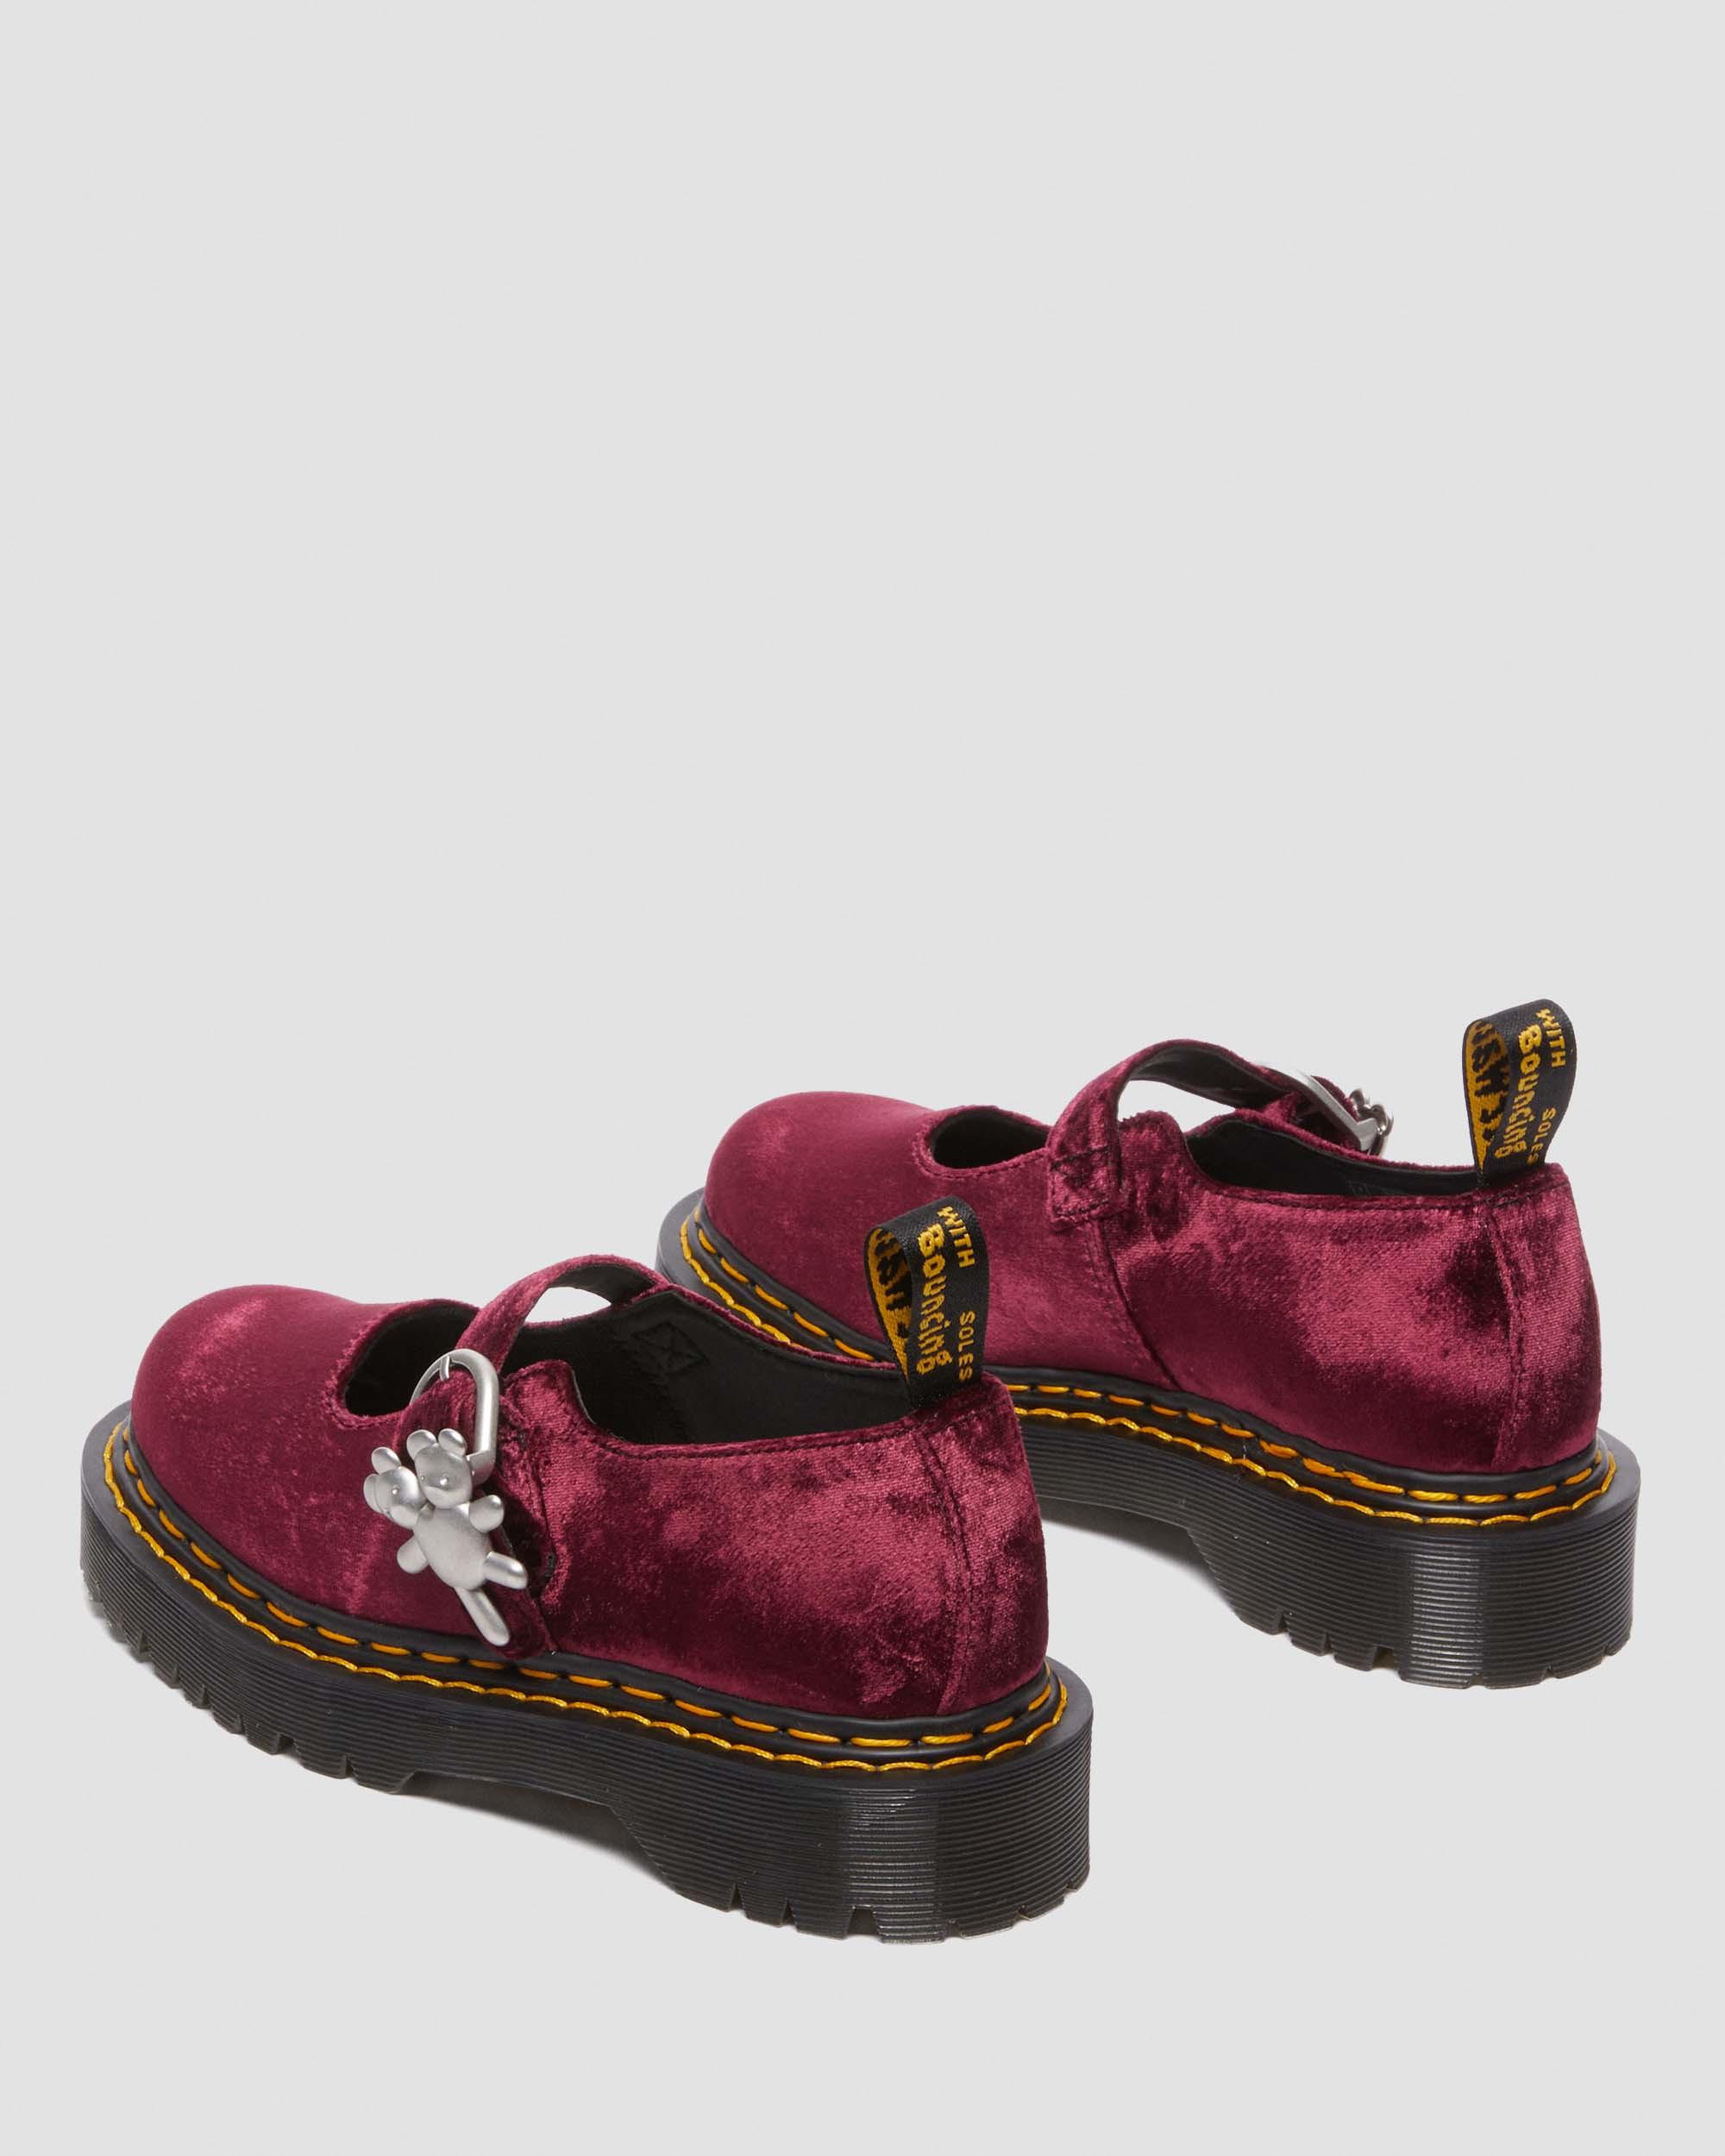 Addina Heaven by Marc Jacobs Velvet Shoes in Cherry Red | Dr. Martens